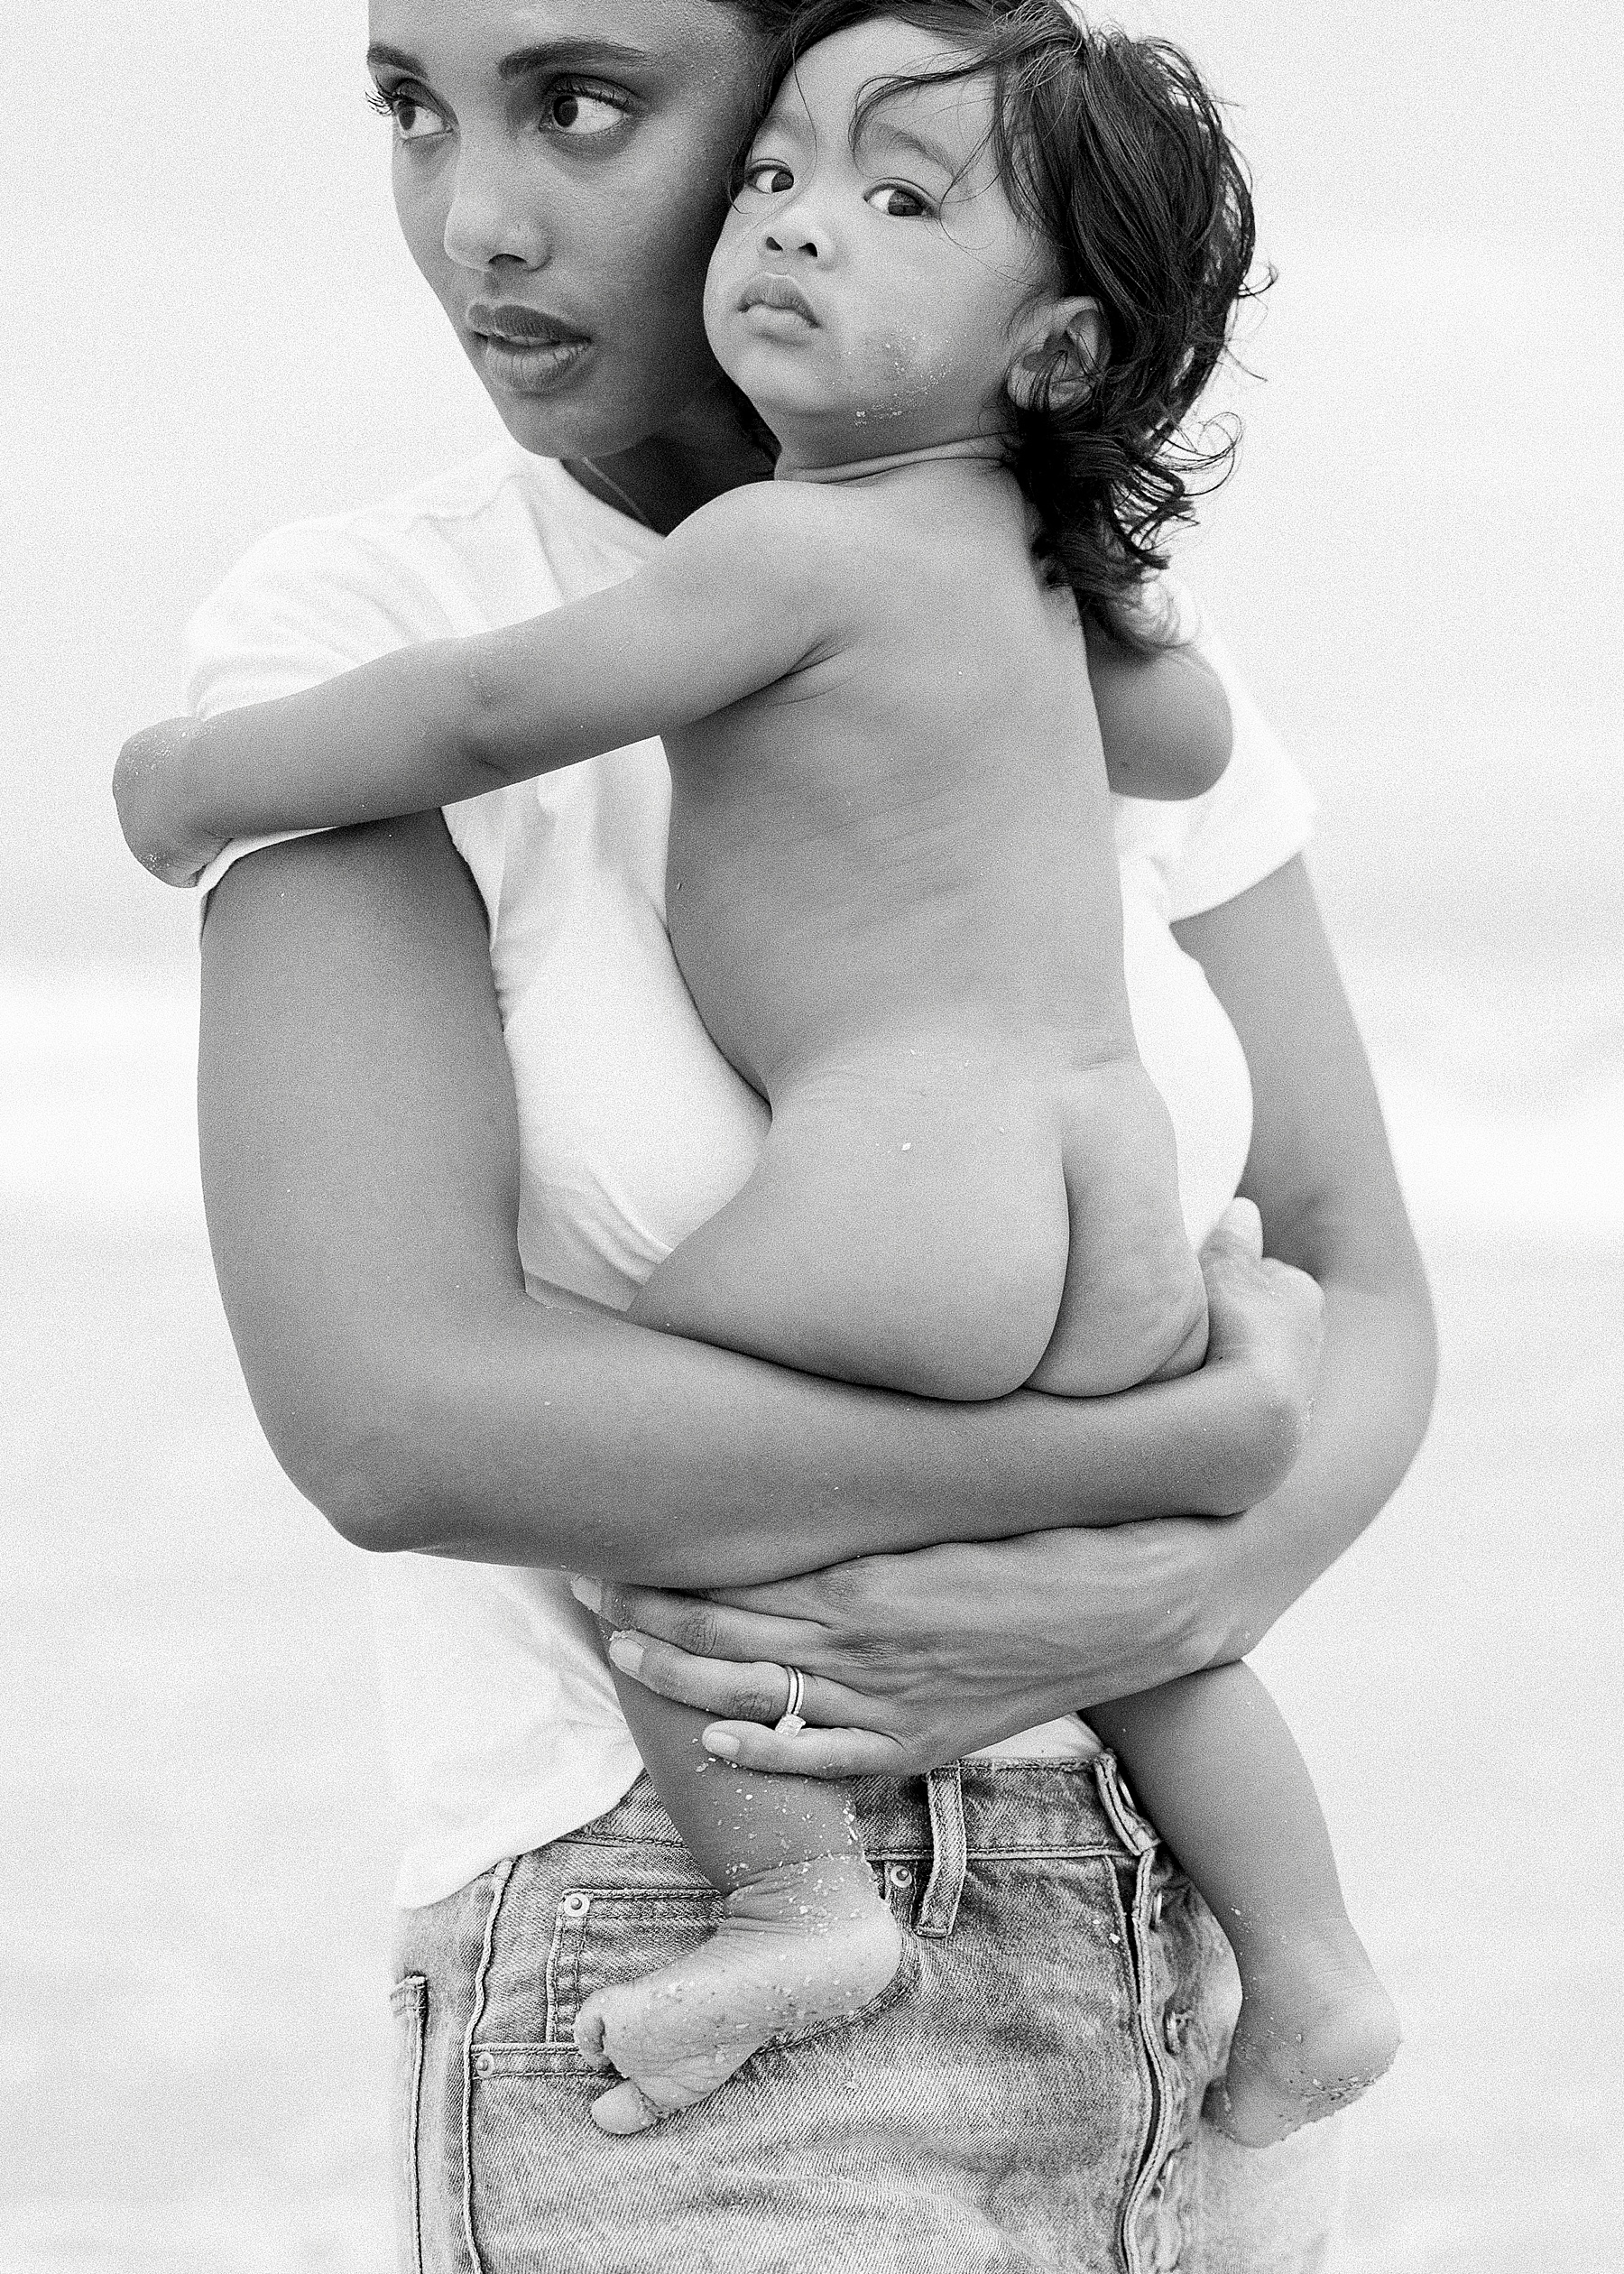 mom holding baby wearing white shirt and jeans on the beach